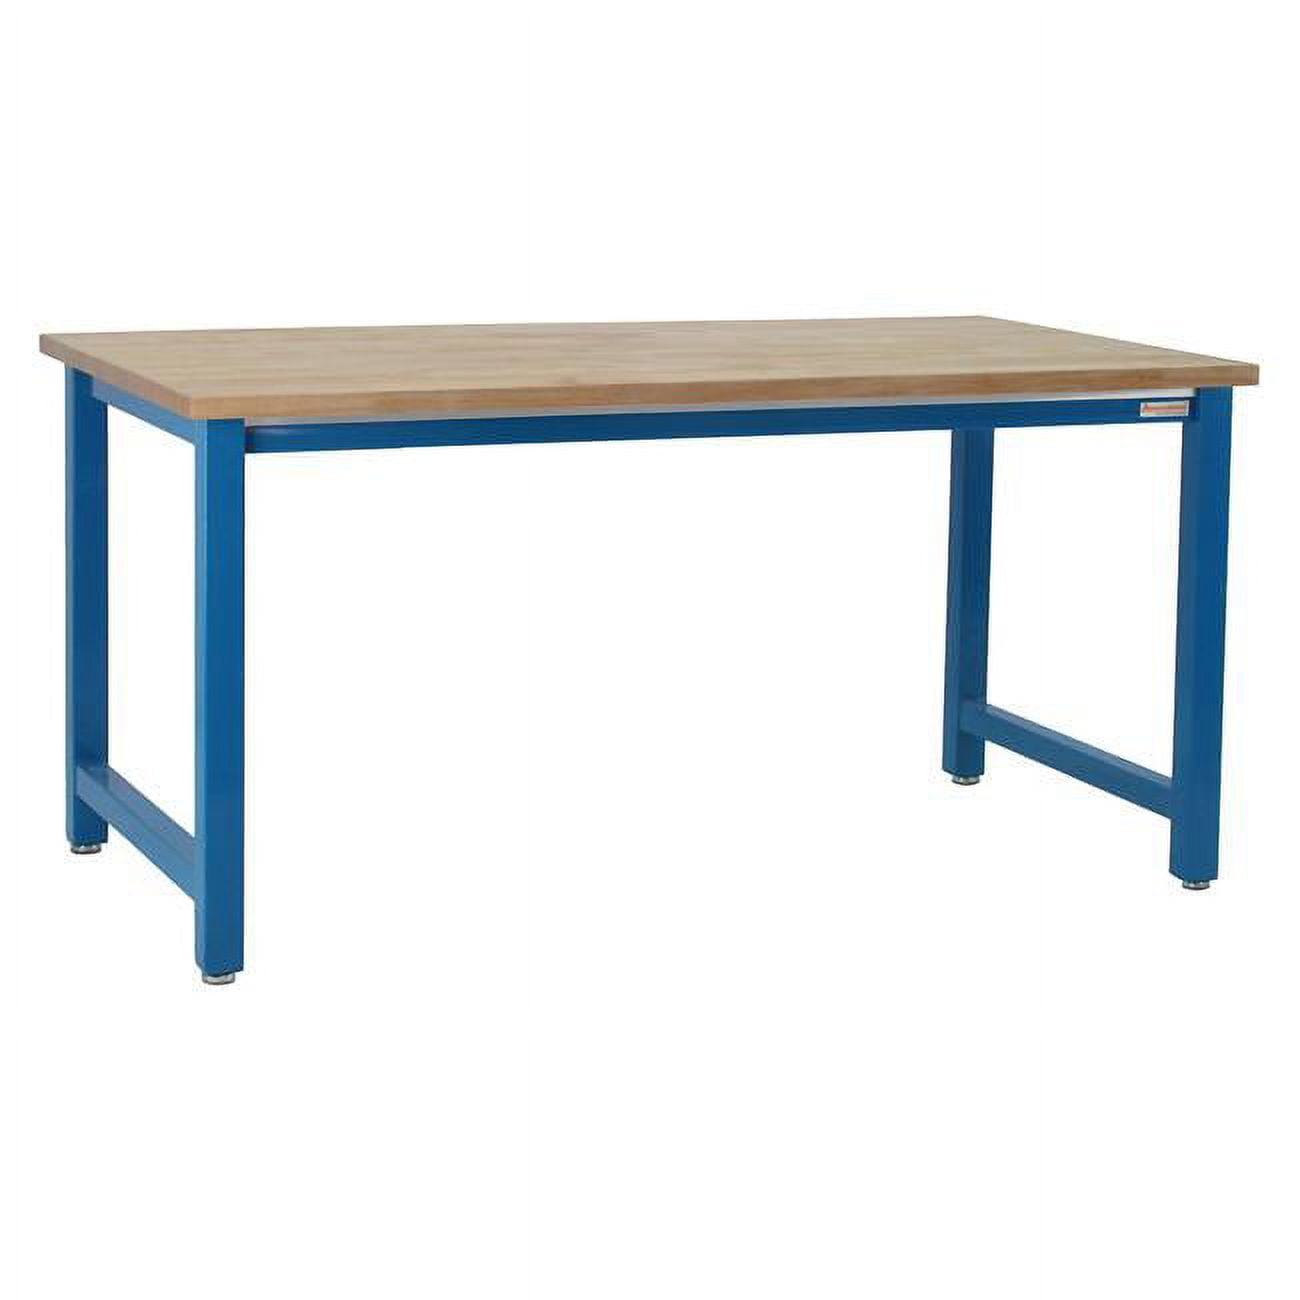 BenchPro KW3096-LBFr34 30 x 96 in. Kennedy Workbenches with Solid 1.75 in. Thick Maple Butcher Block Top, Light Blue